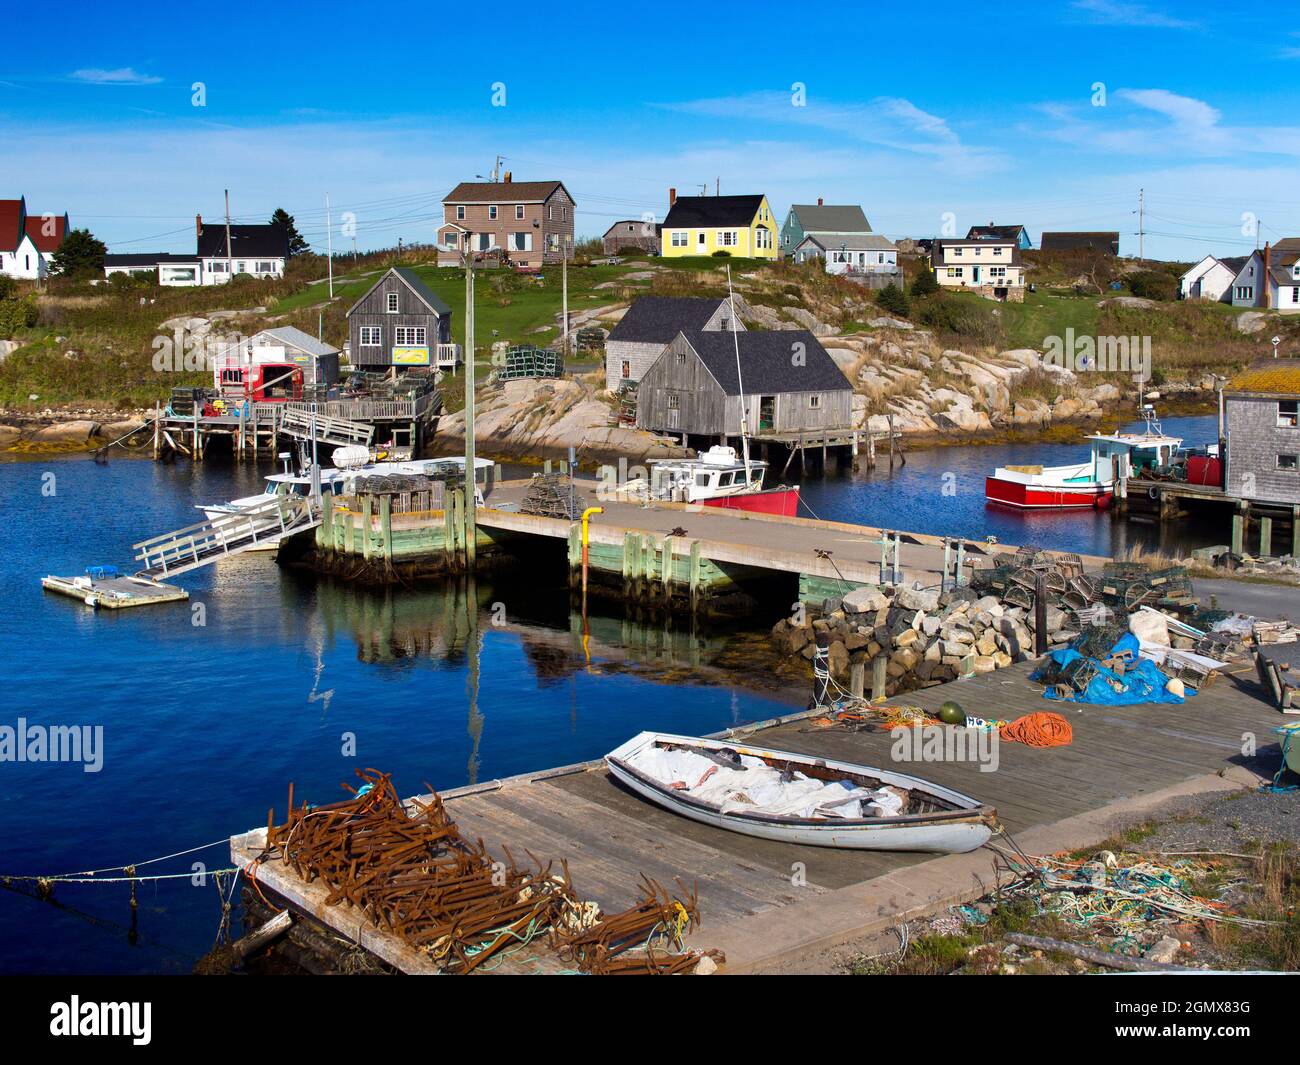 Peggy's Cove, Nova Scotia, Canada - 11 October 2013  Peggy's Cove is a tiny, quaint fishing village located on the eastern shore of St. Margarets Bay Stock Photo